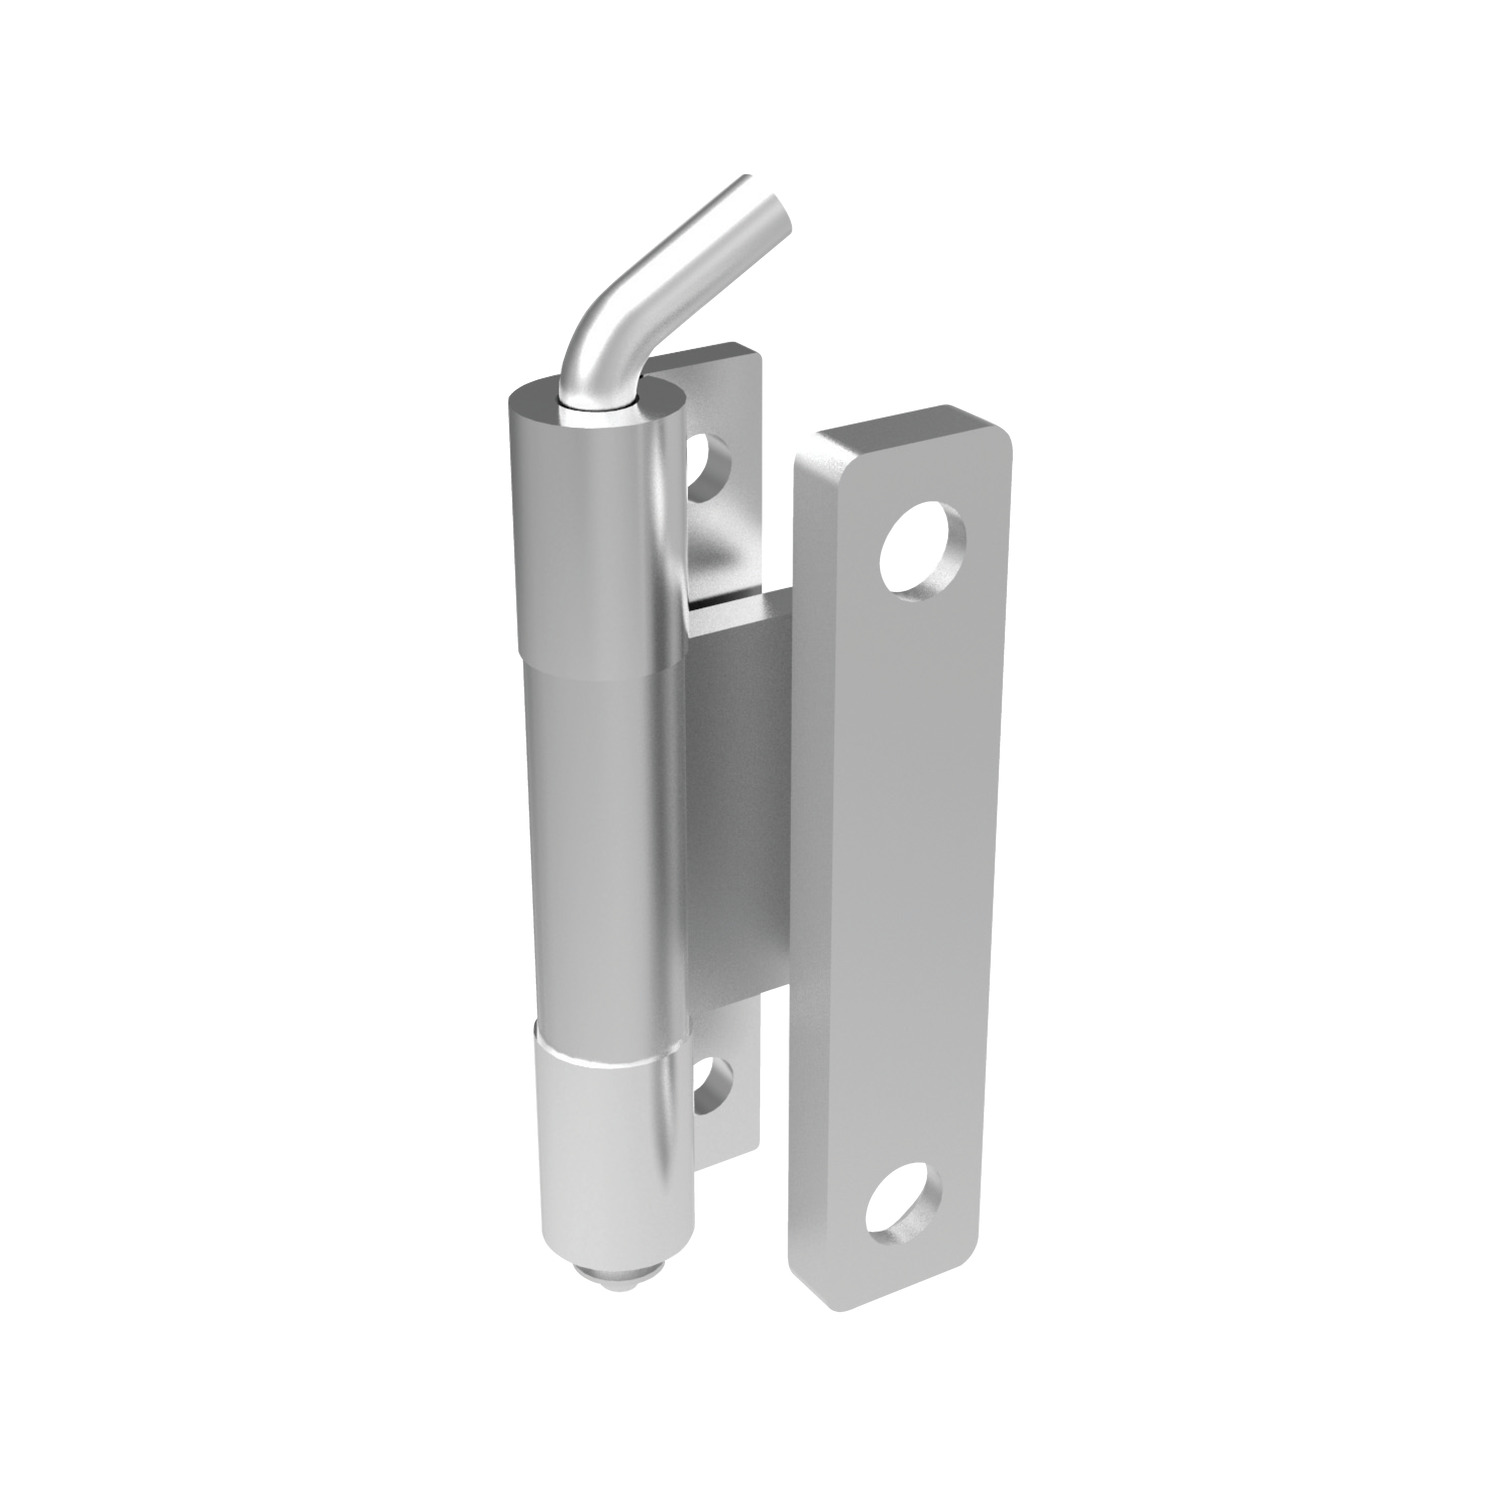 S2115 Concealed Pivot Hinges - Lift Off